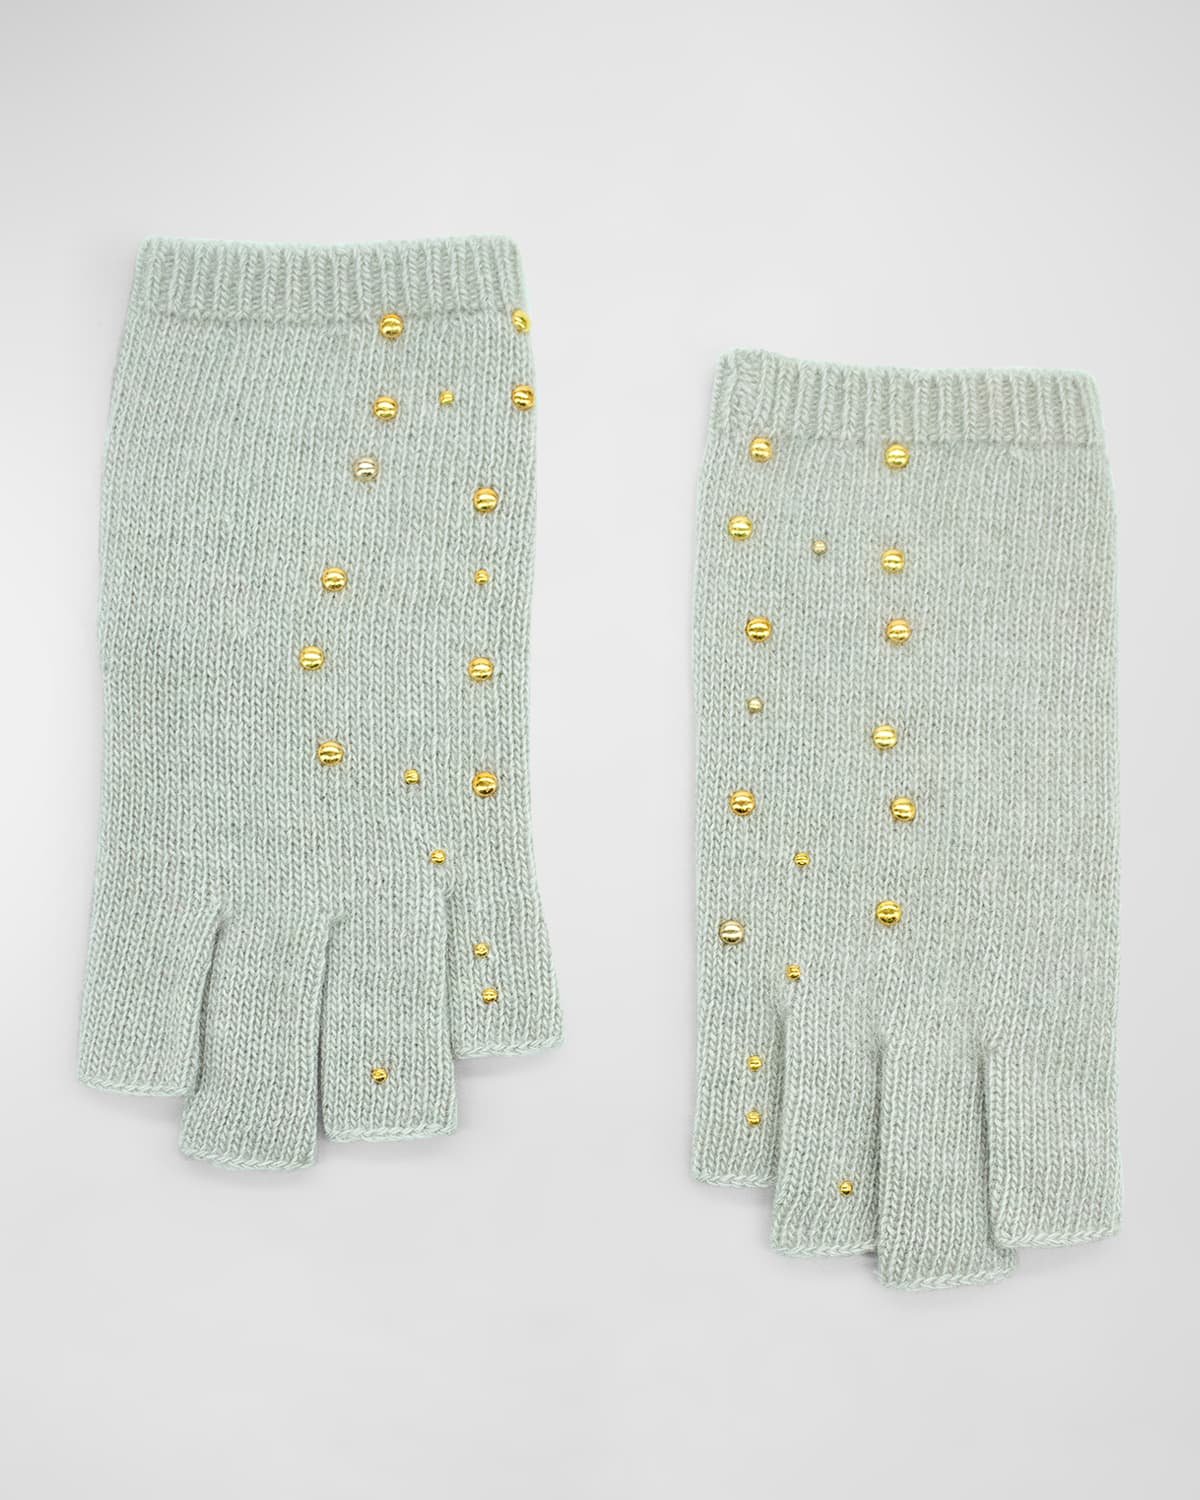 Cashmere Fingerless Gloves with Scattered Studs